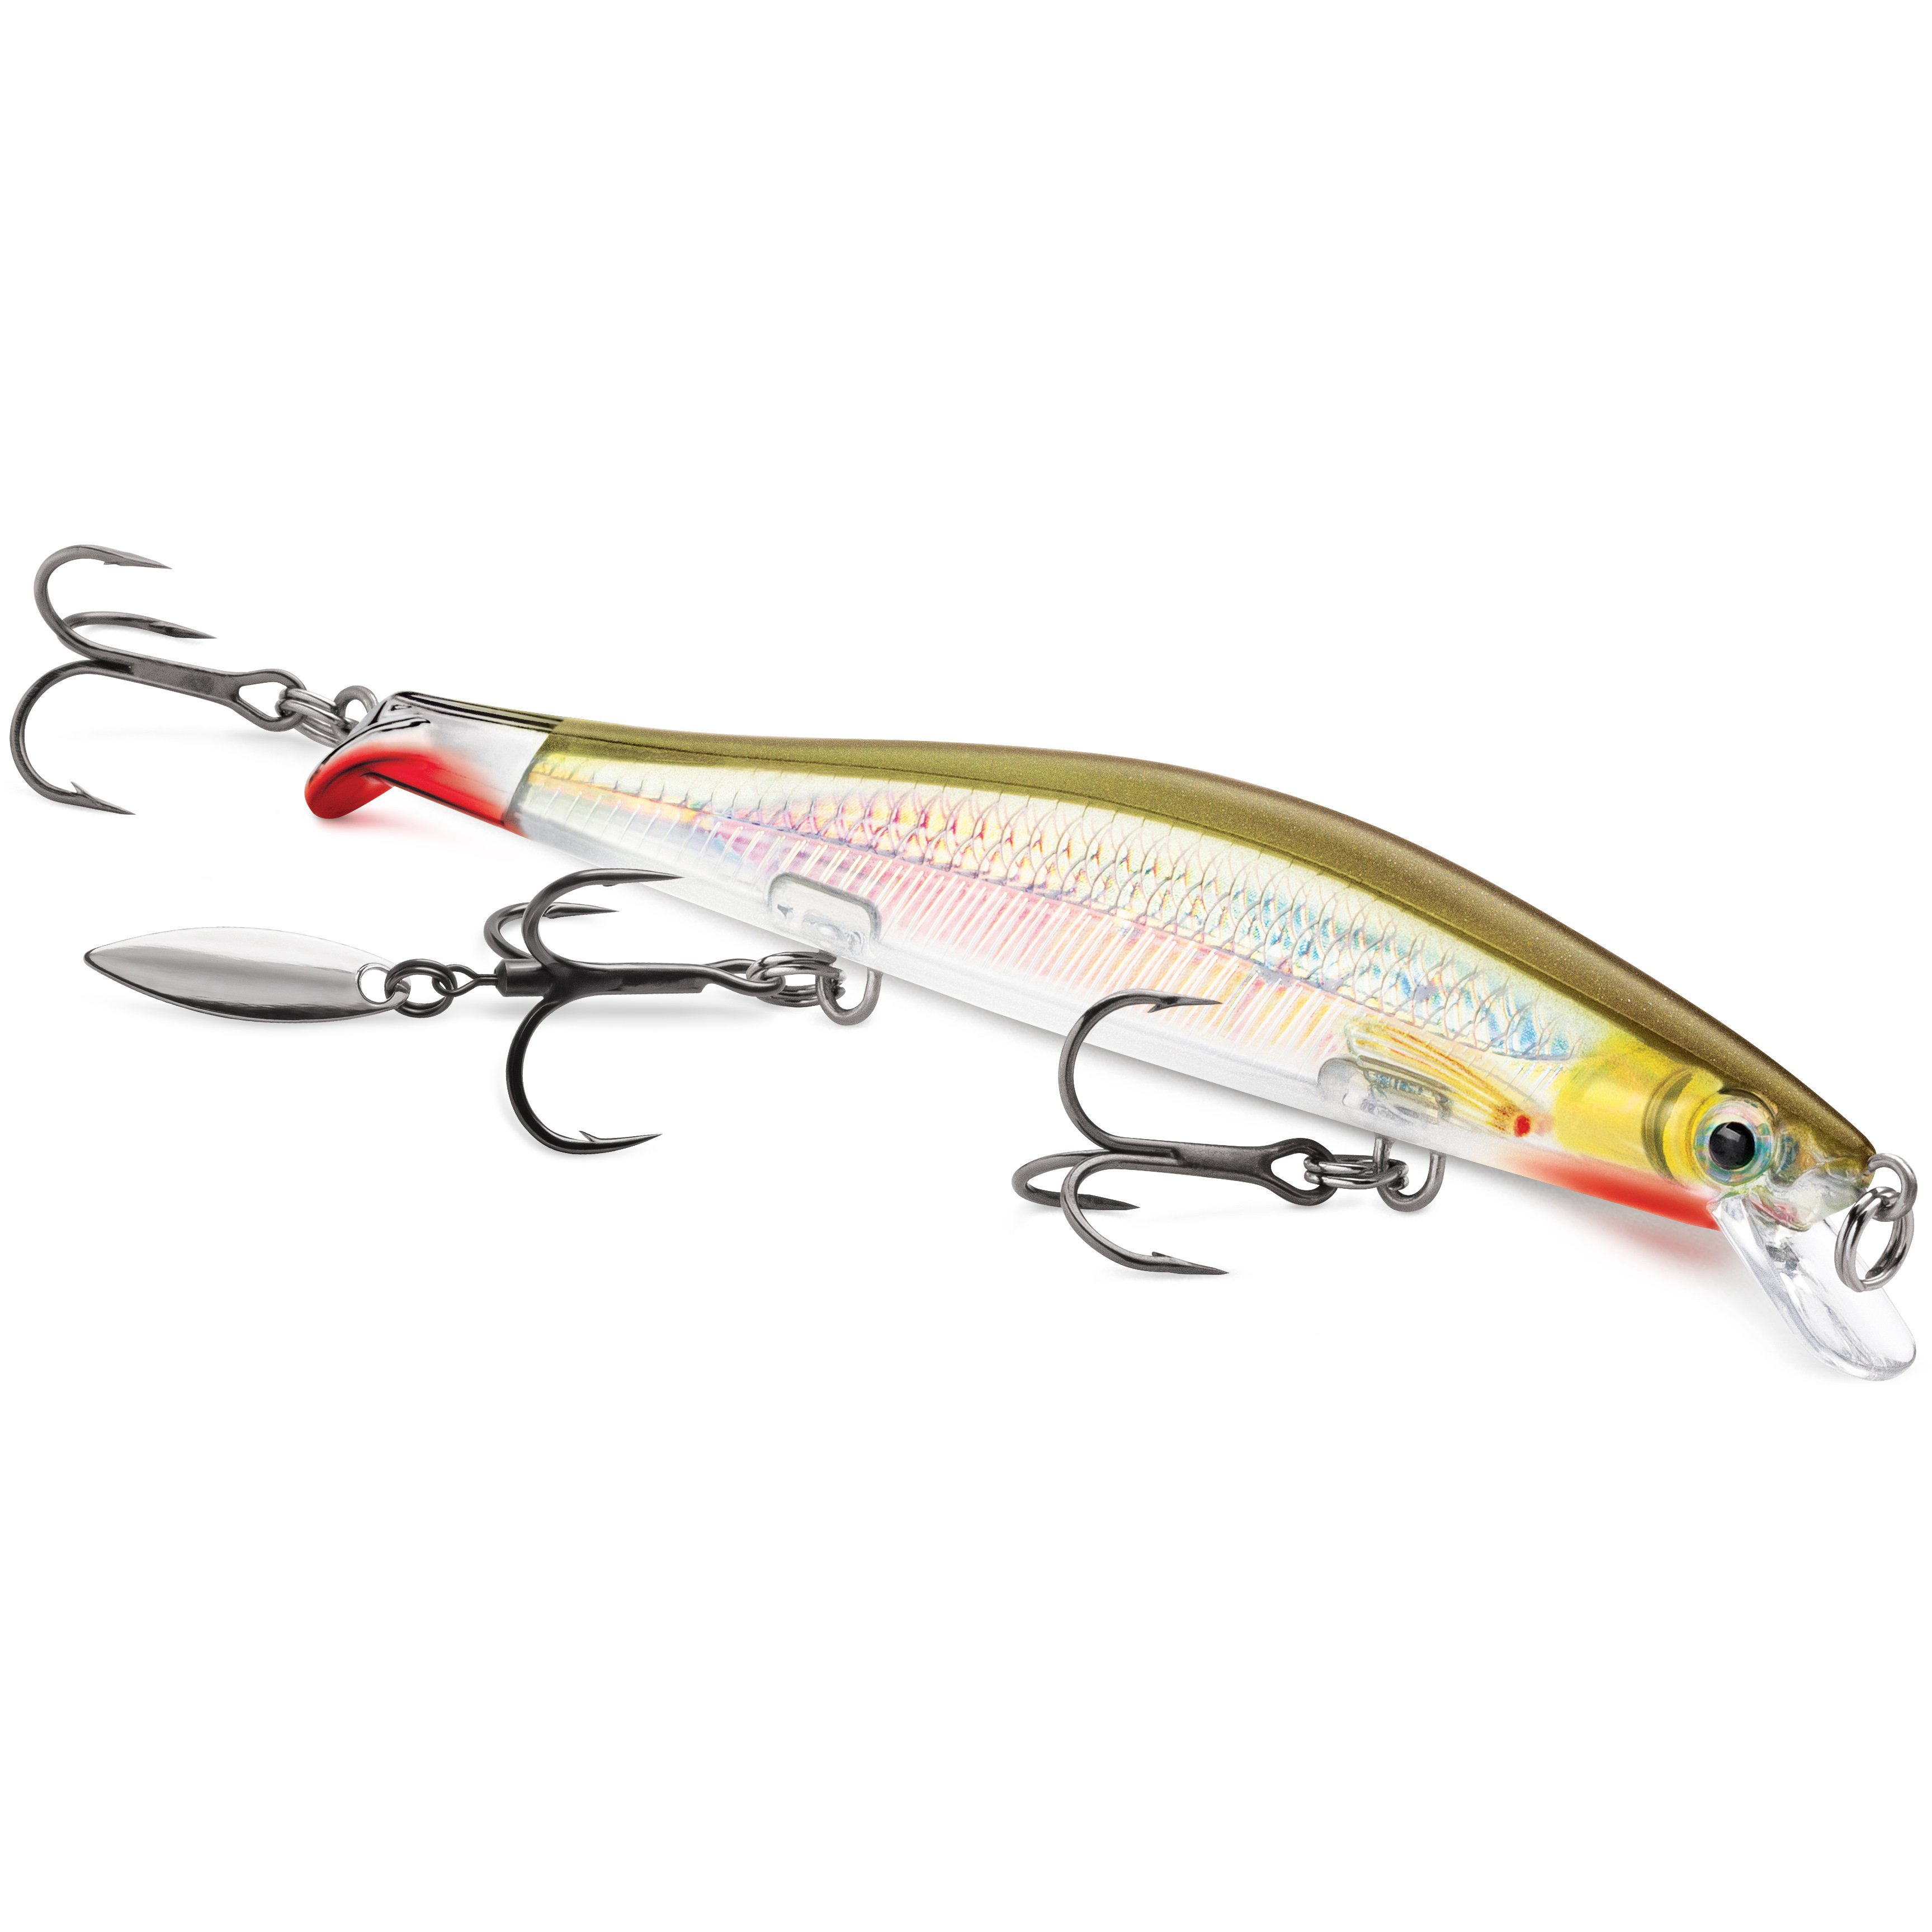 Spinpoler Bladed Treble Hooks With Willow Blade Replacement Bladed Spinner  Treble Hooks For Bass Trout Bass Freshwater Saltwater